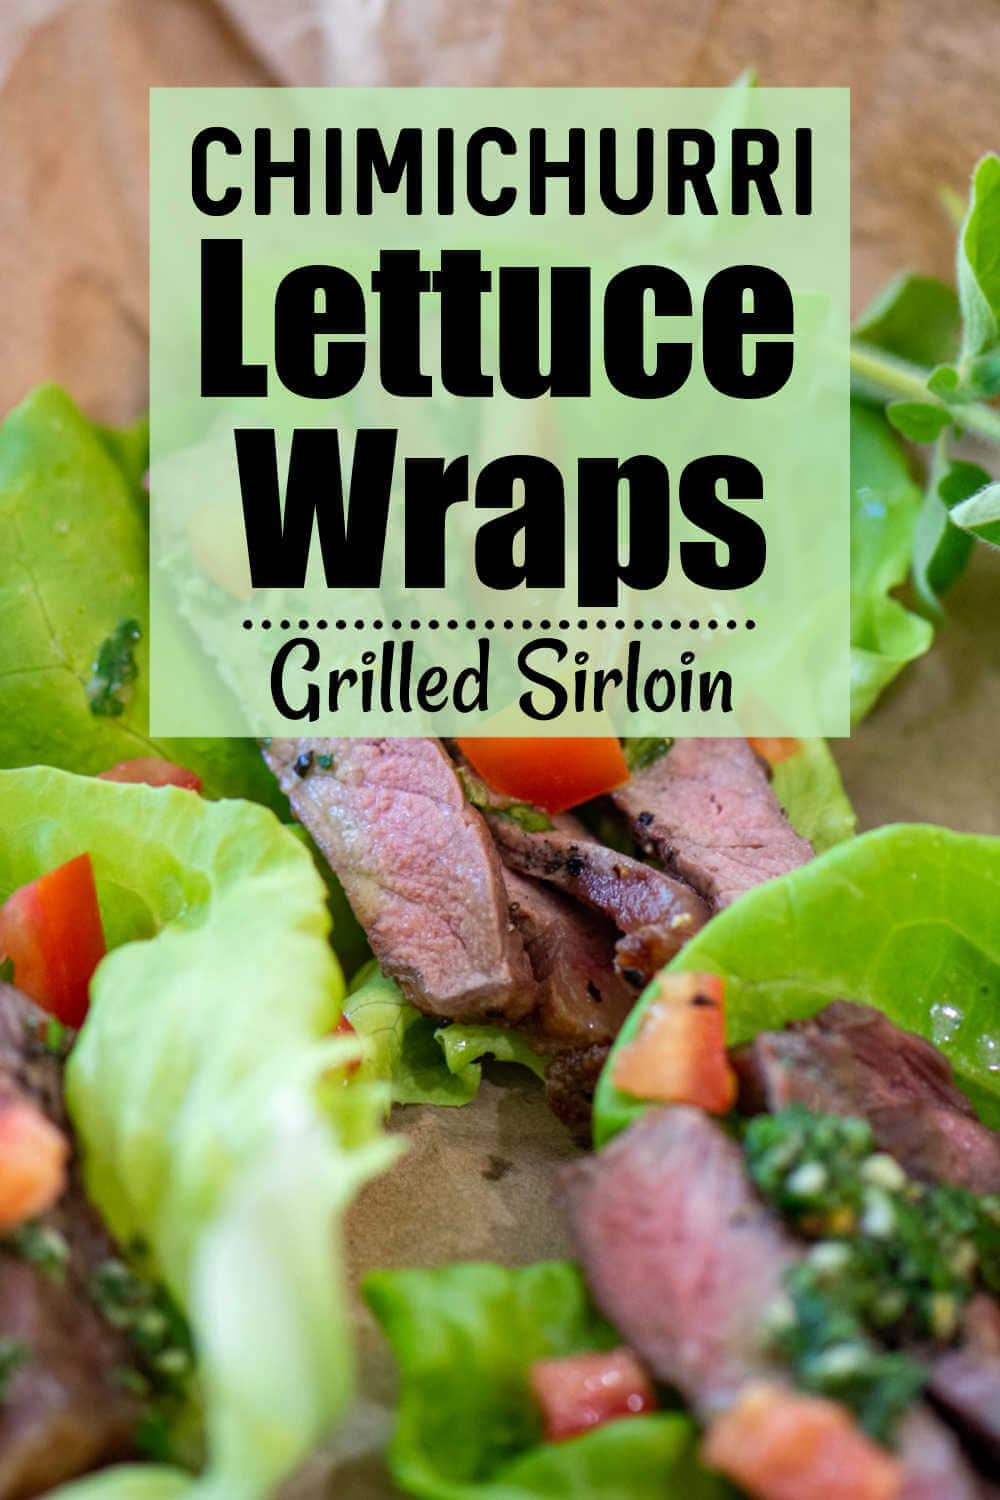 Grilled Sirloin Steak with Chimichurri in Lettuce Wraps {25 Minutes}